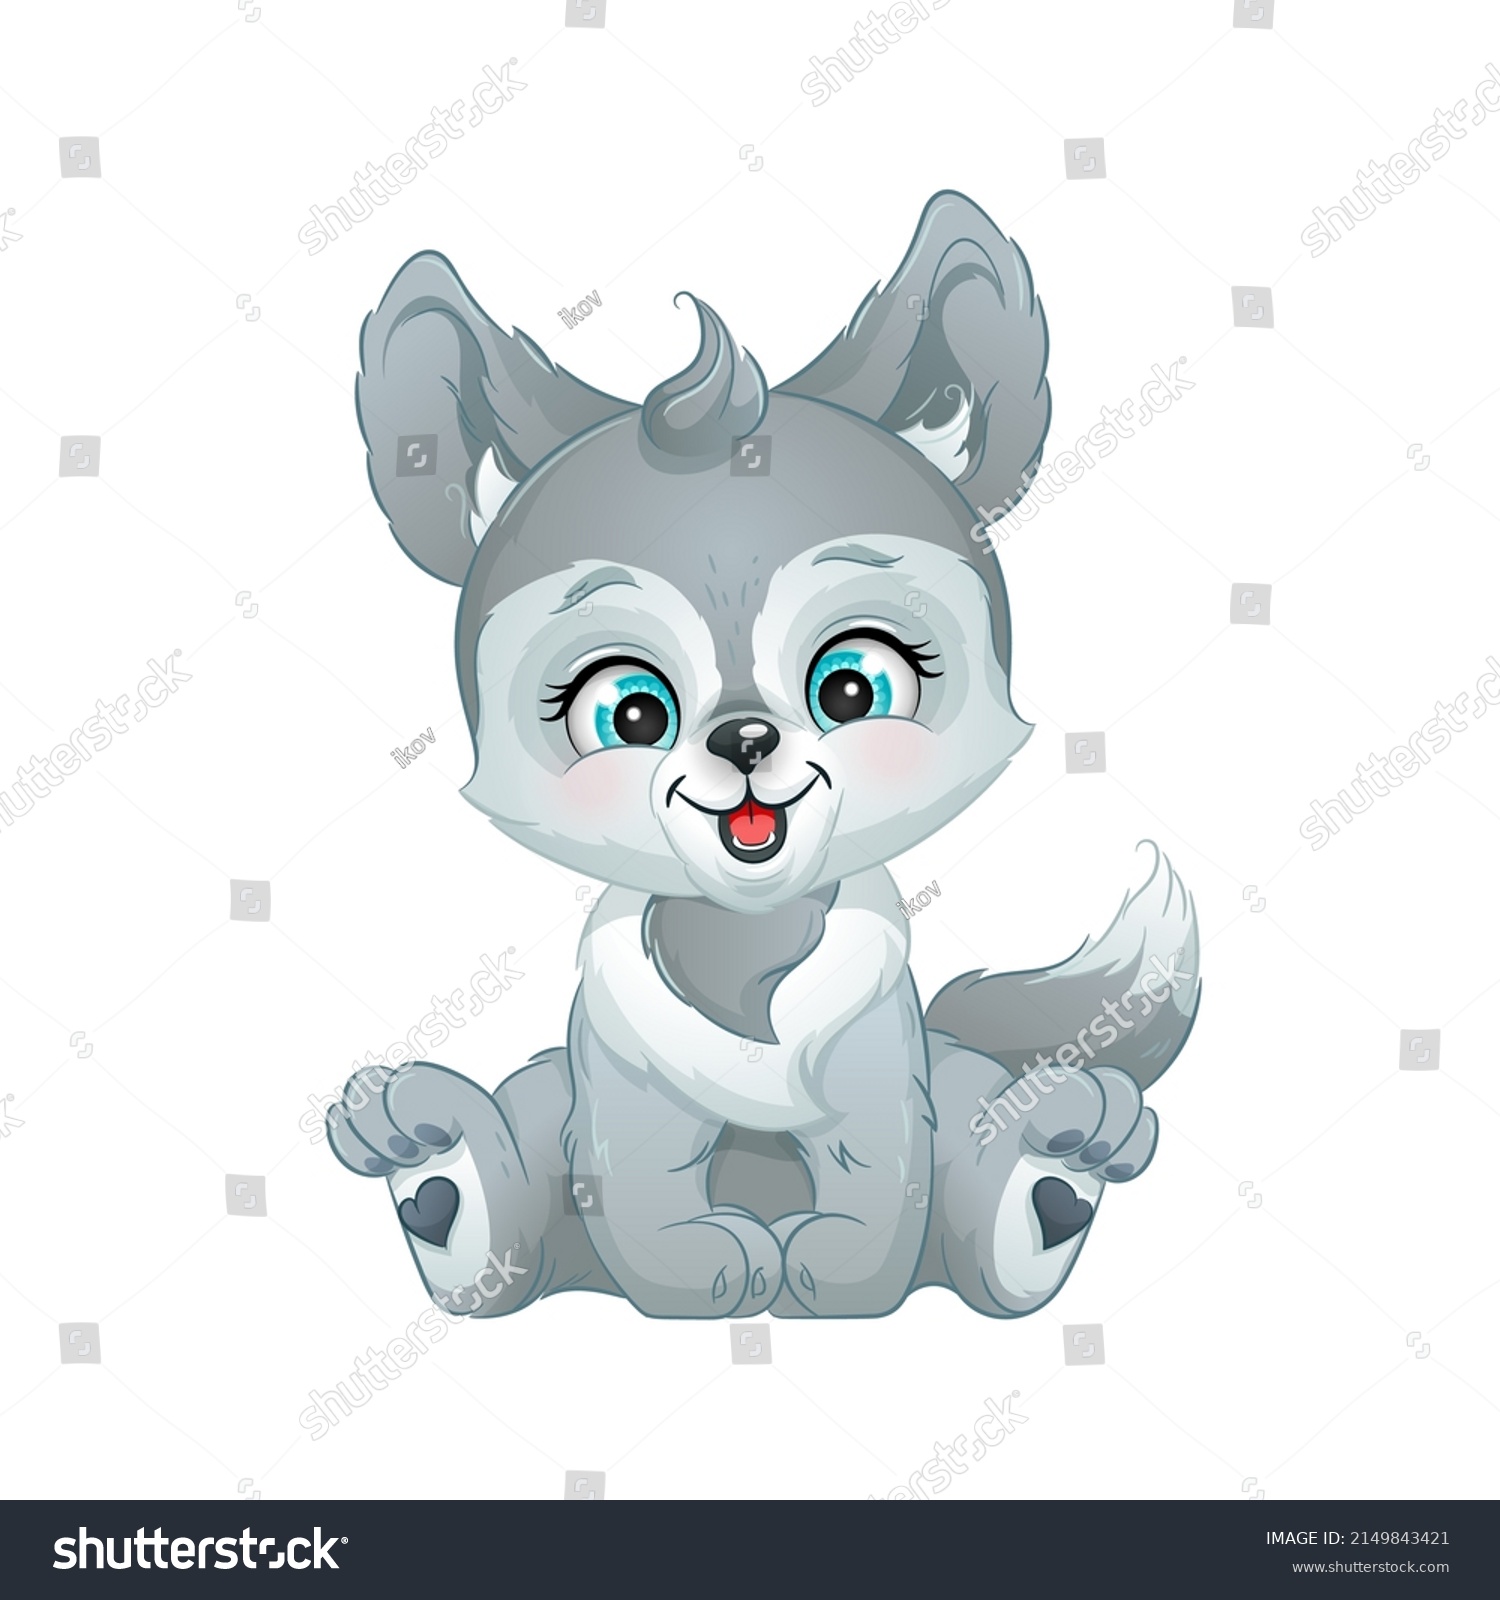 58 Sublimation wolf Images, Stock Photos & Vectors | Shutterstock